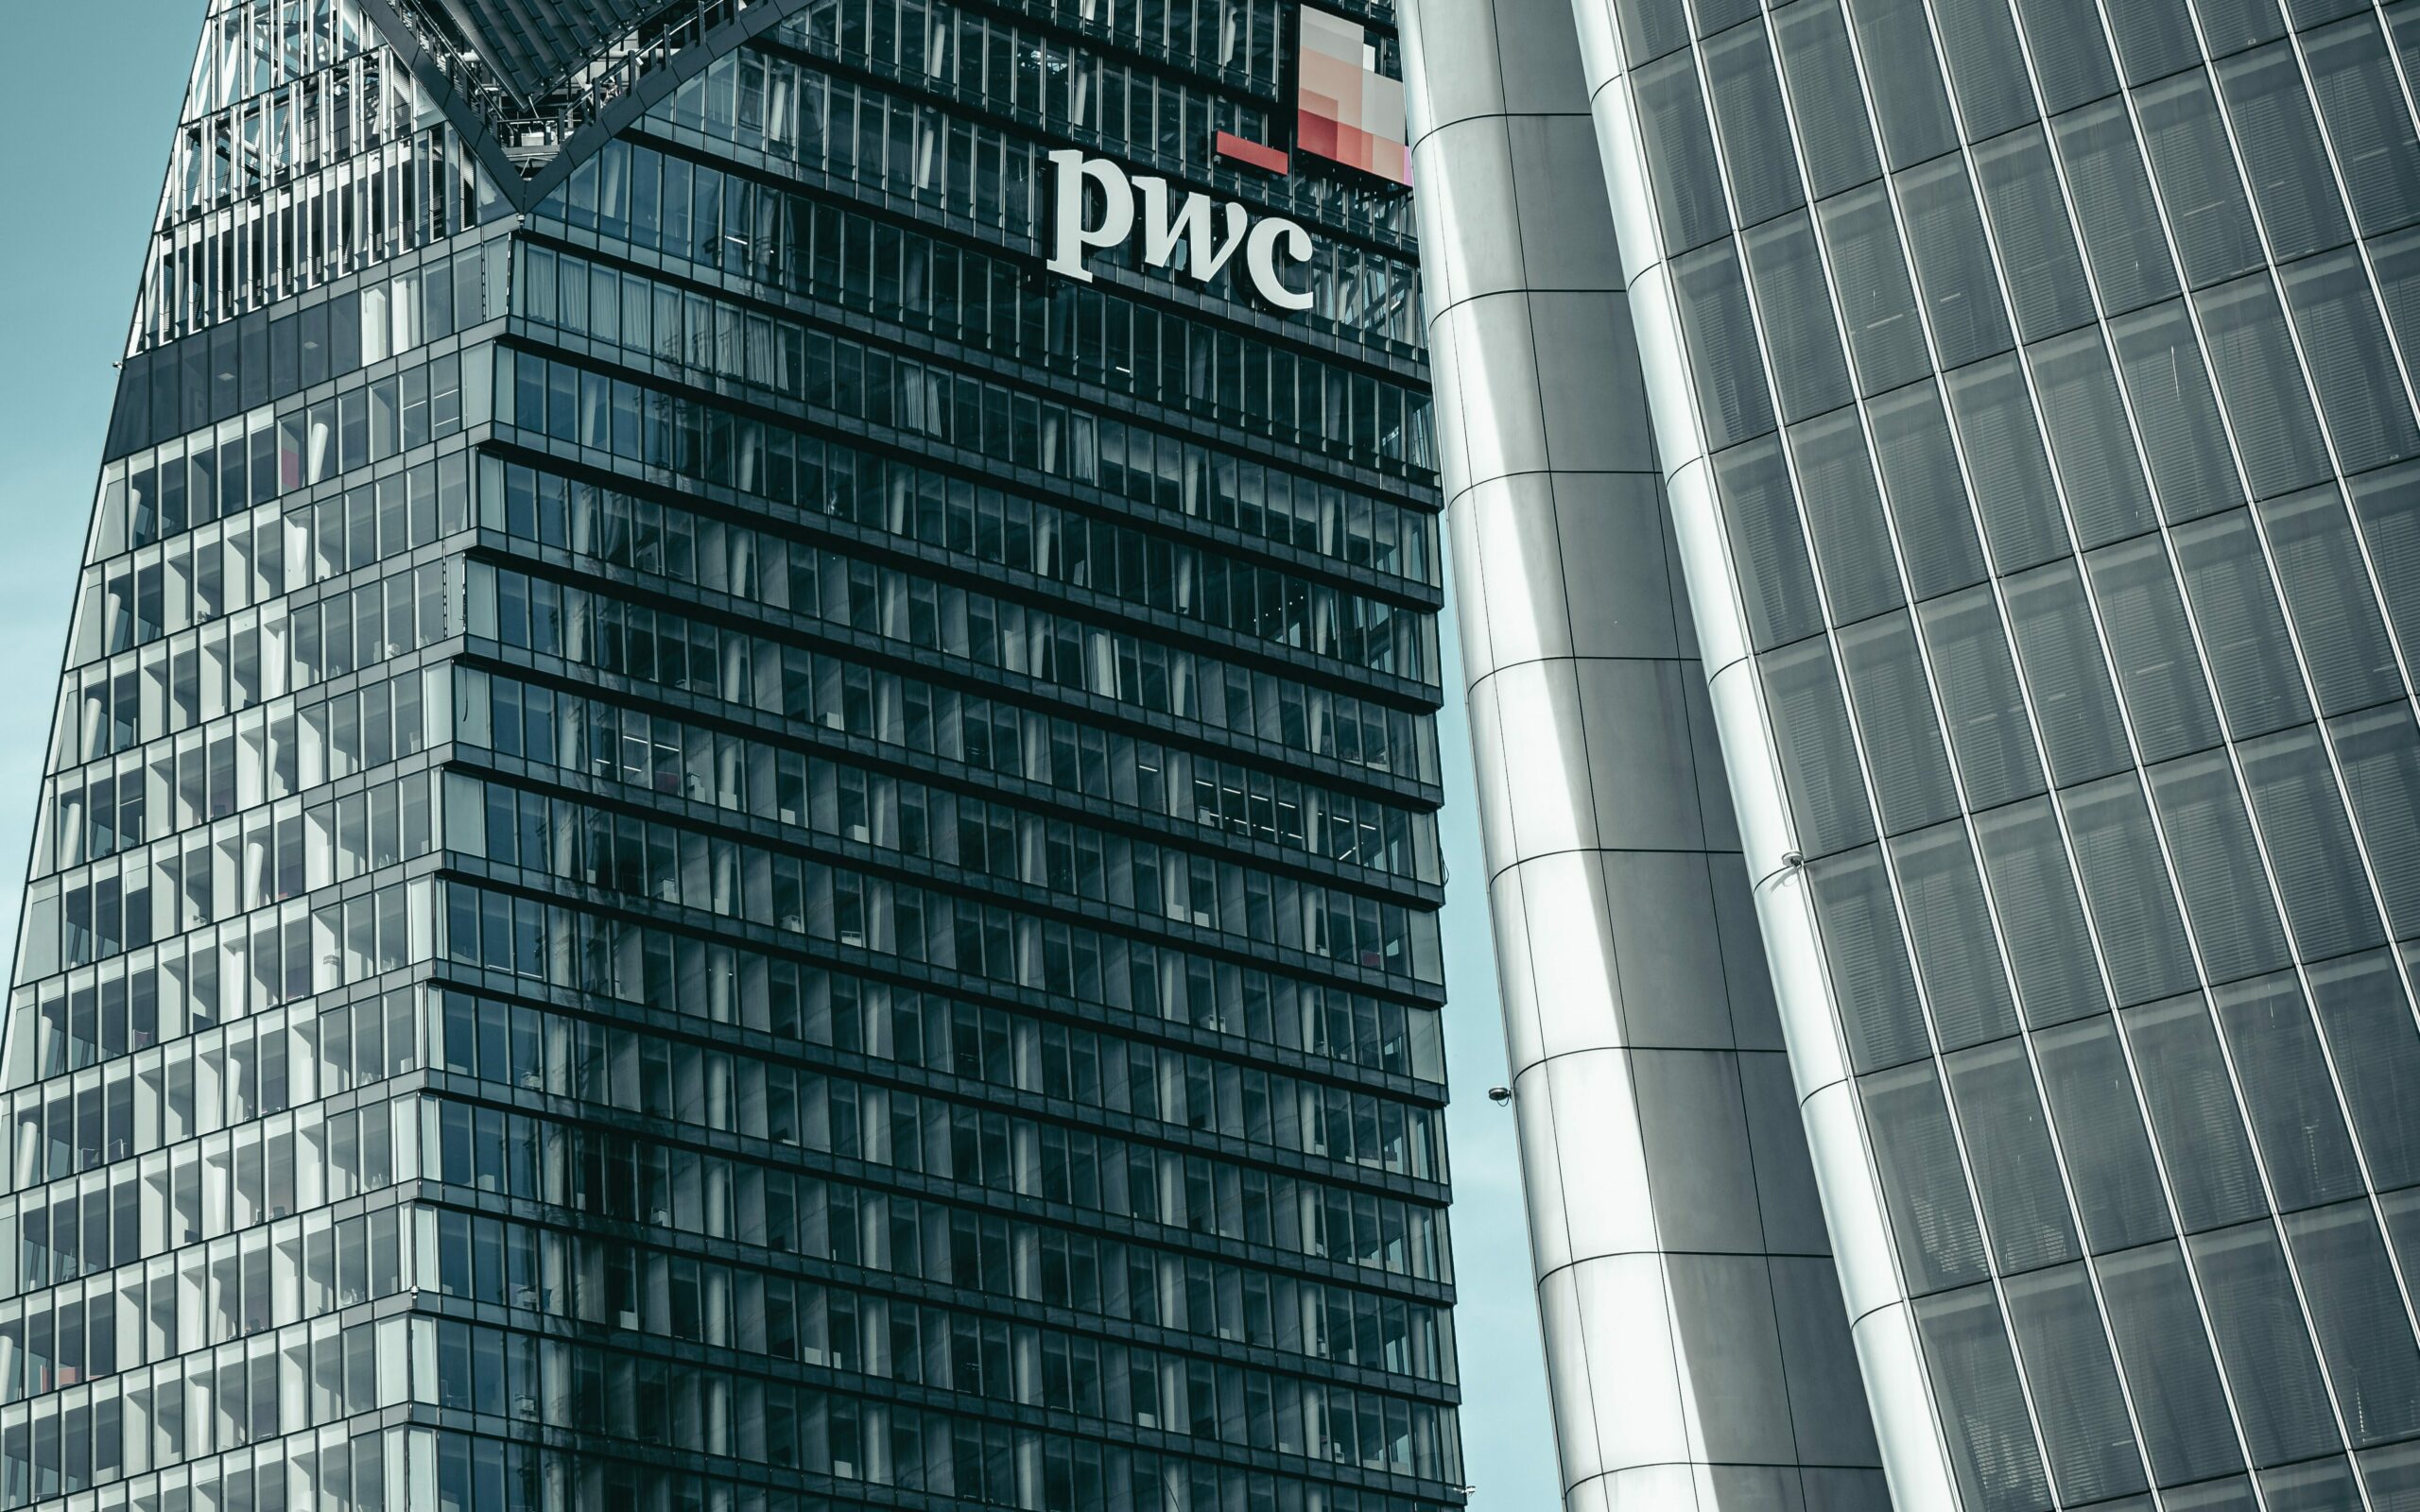 PwC Director Salary - Know More